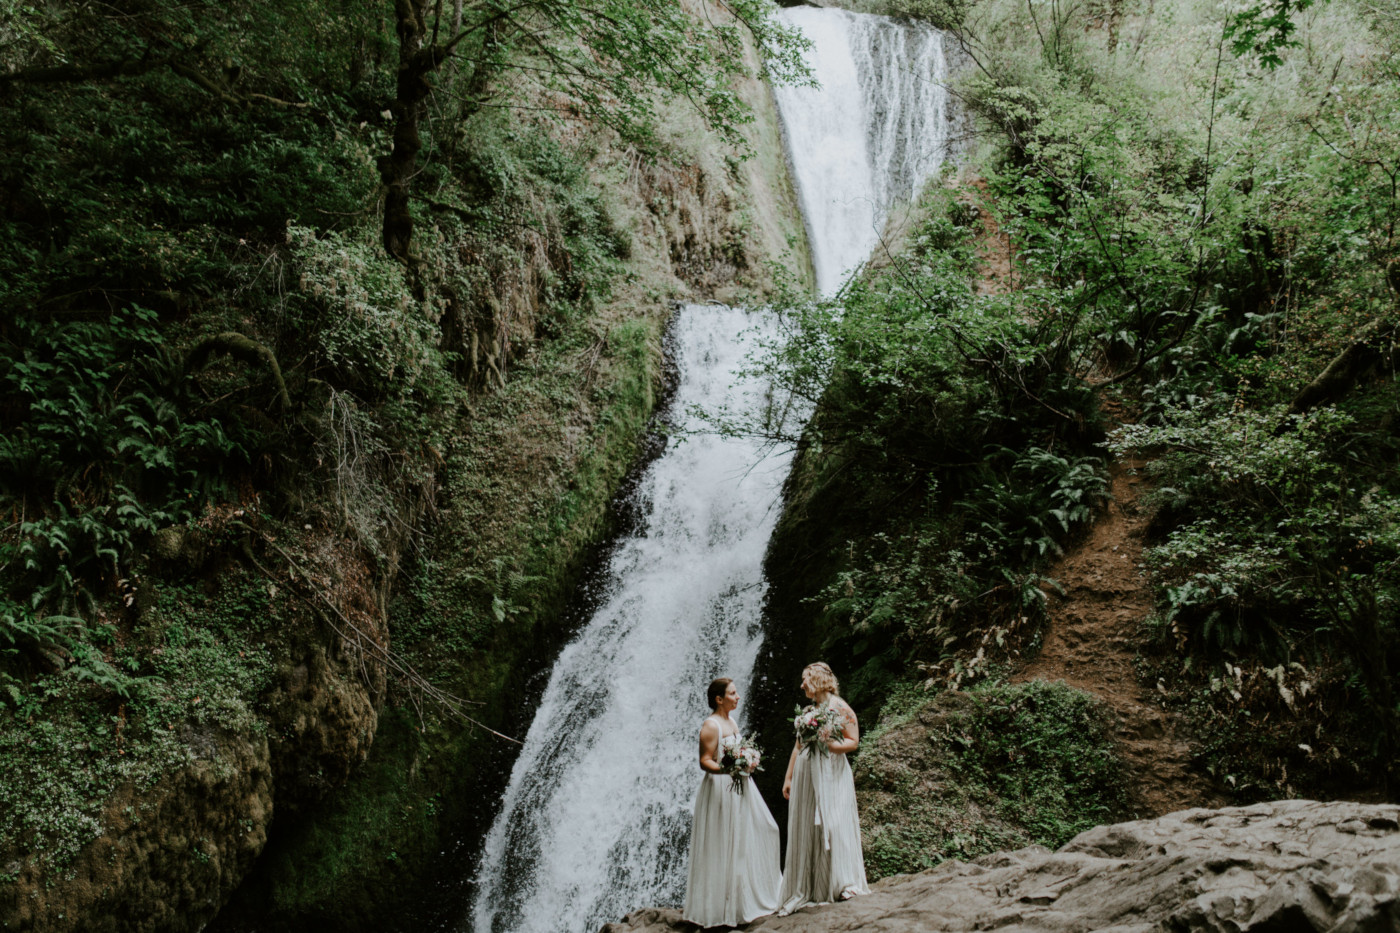 Audrey and Kate stand in front of each other at Bridal Veil Falls. Elopement wedding photography at Bridal Veil Falls by Sienna Plus Josh.